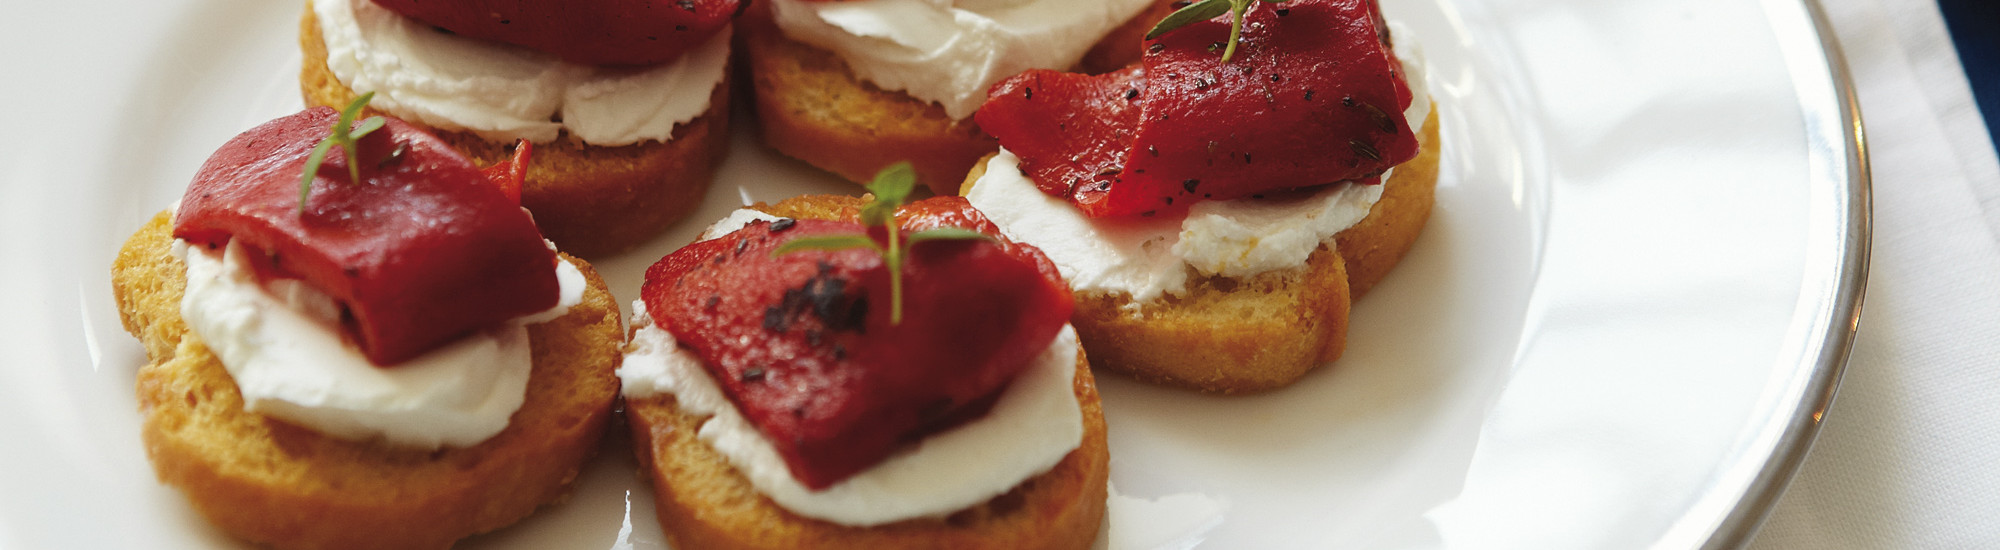 Crostini of roasted red peppers with goats' cheese